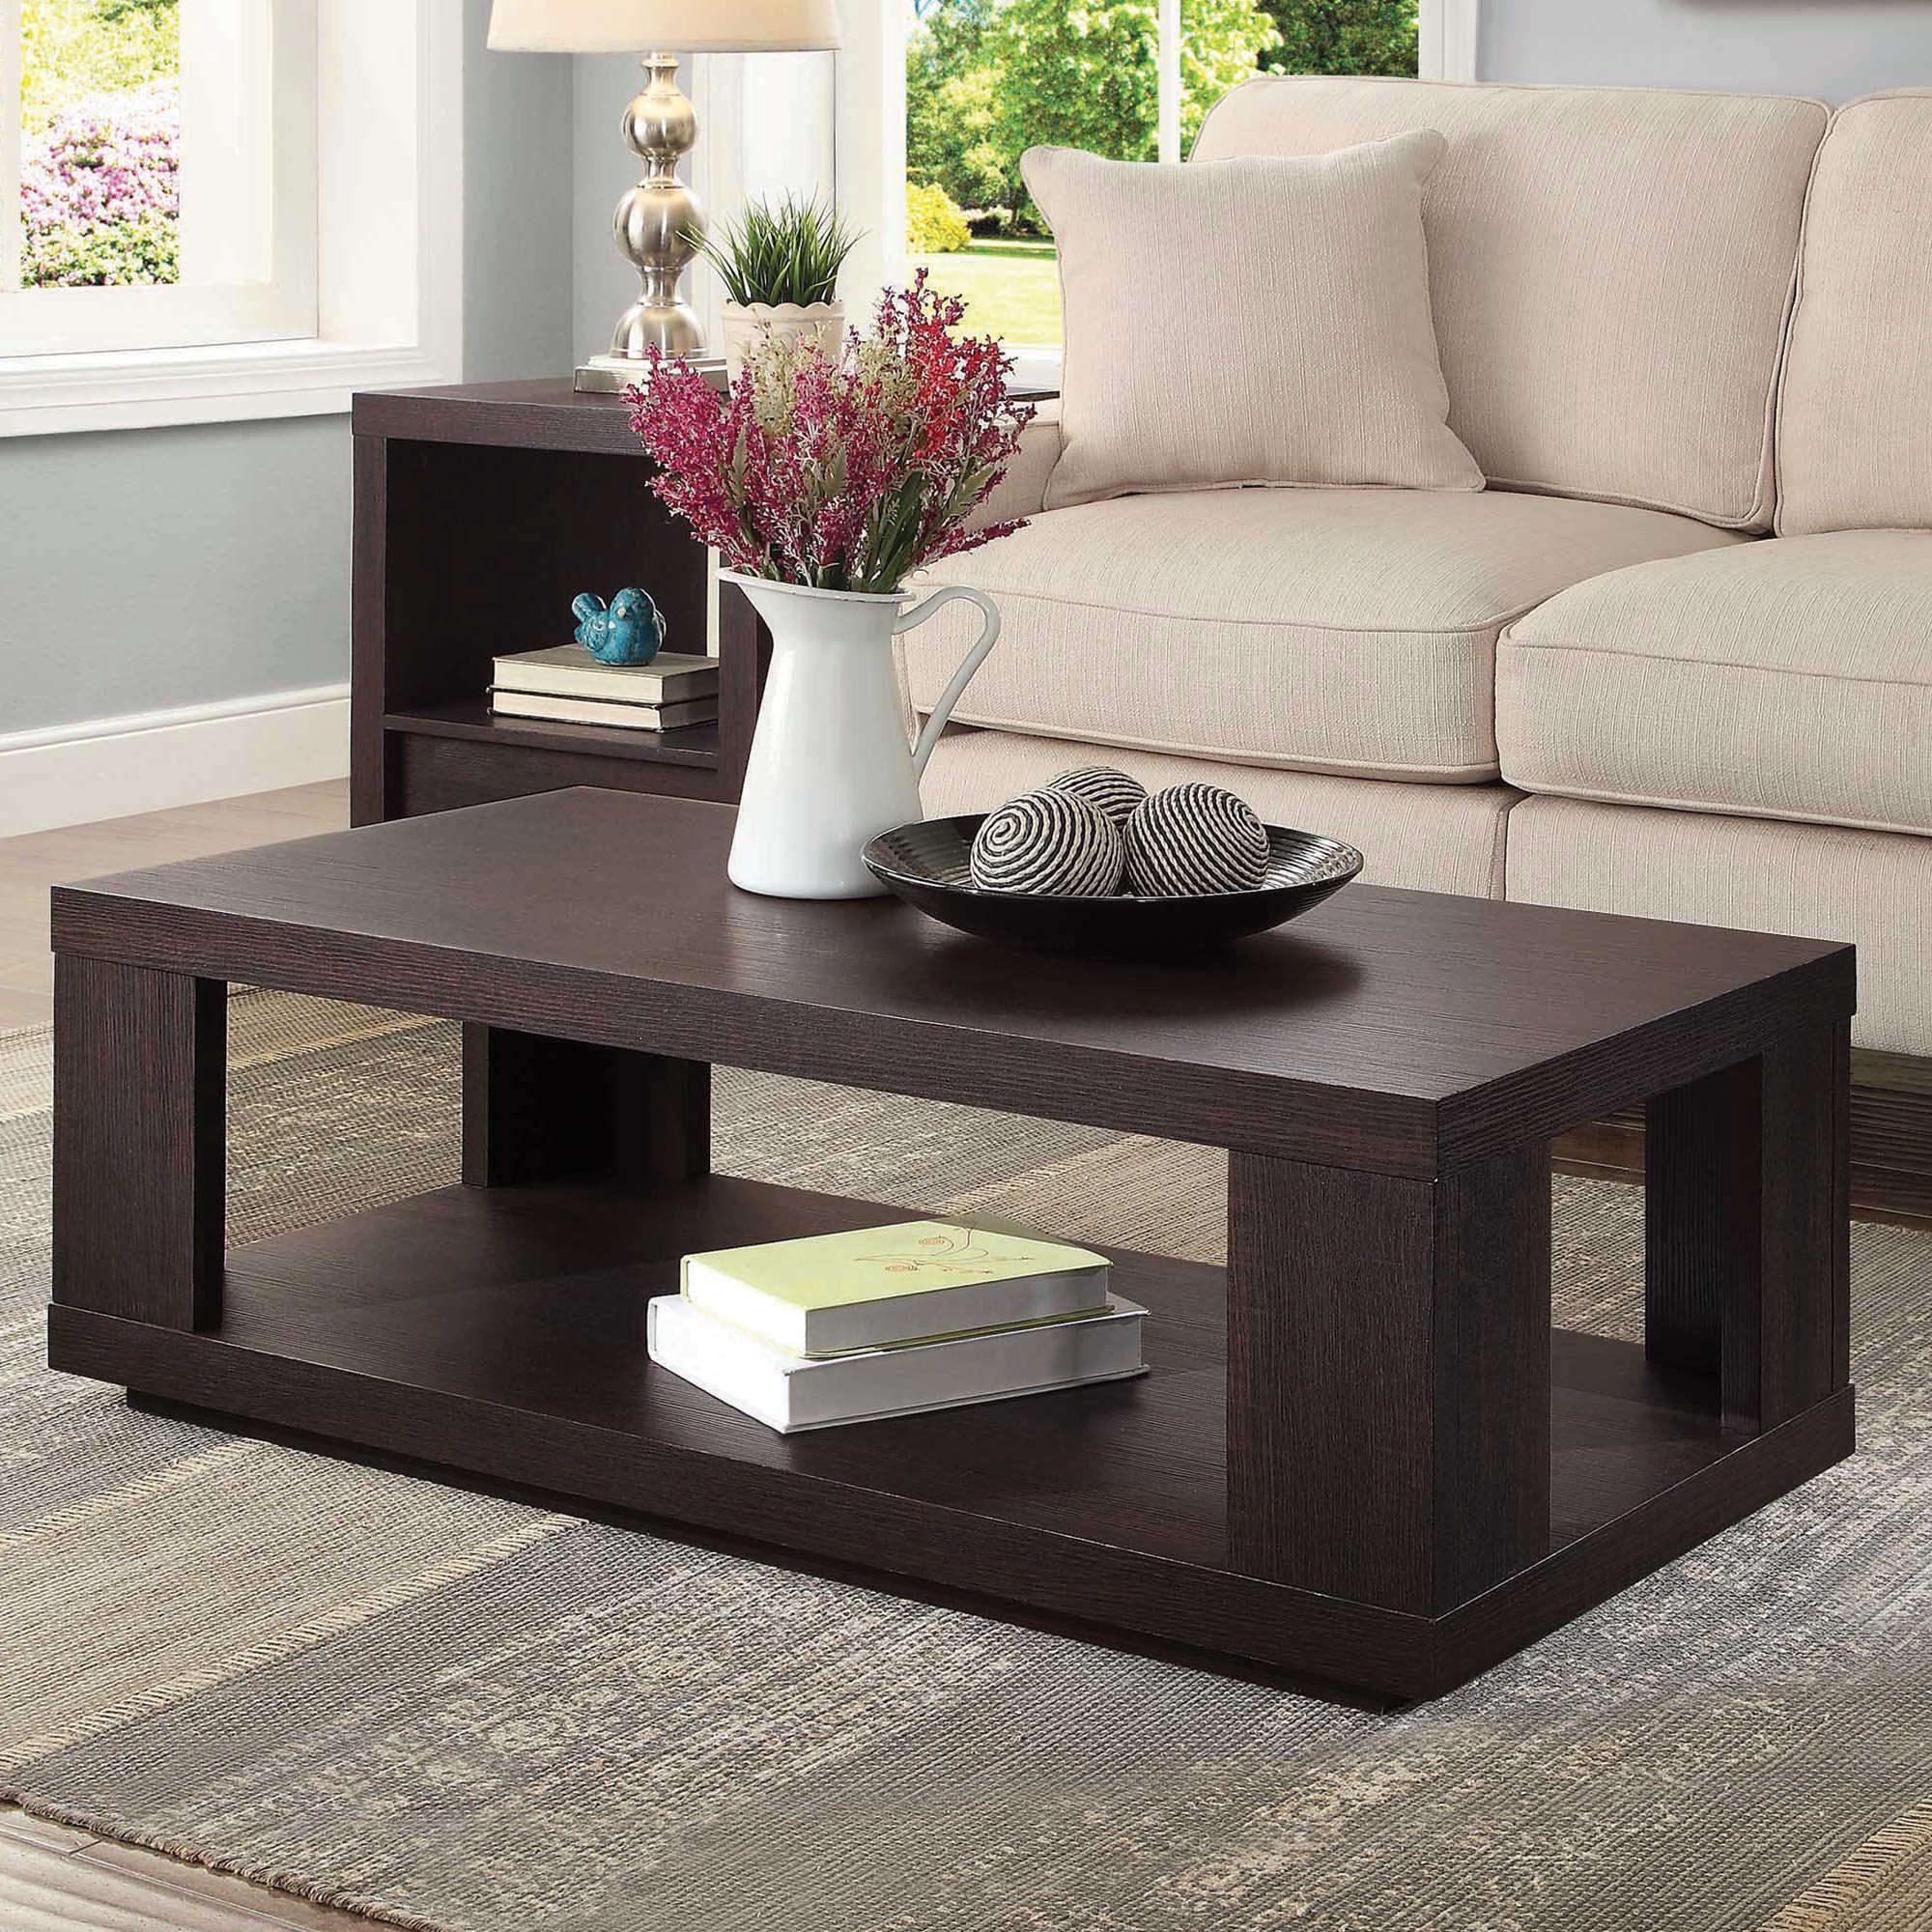 Widely Used Espresso Wood Finish Coffee Tables Regarding Better Homes & Gardens Steele Coffee Table With Lower Shelf, Espresso (View 13 of 15)